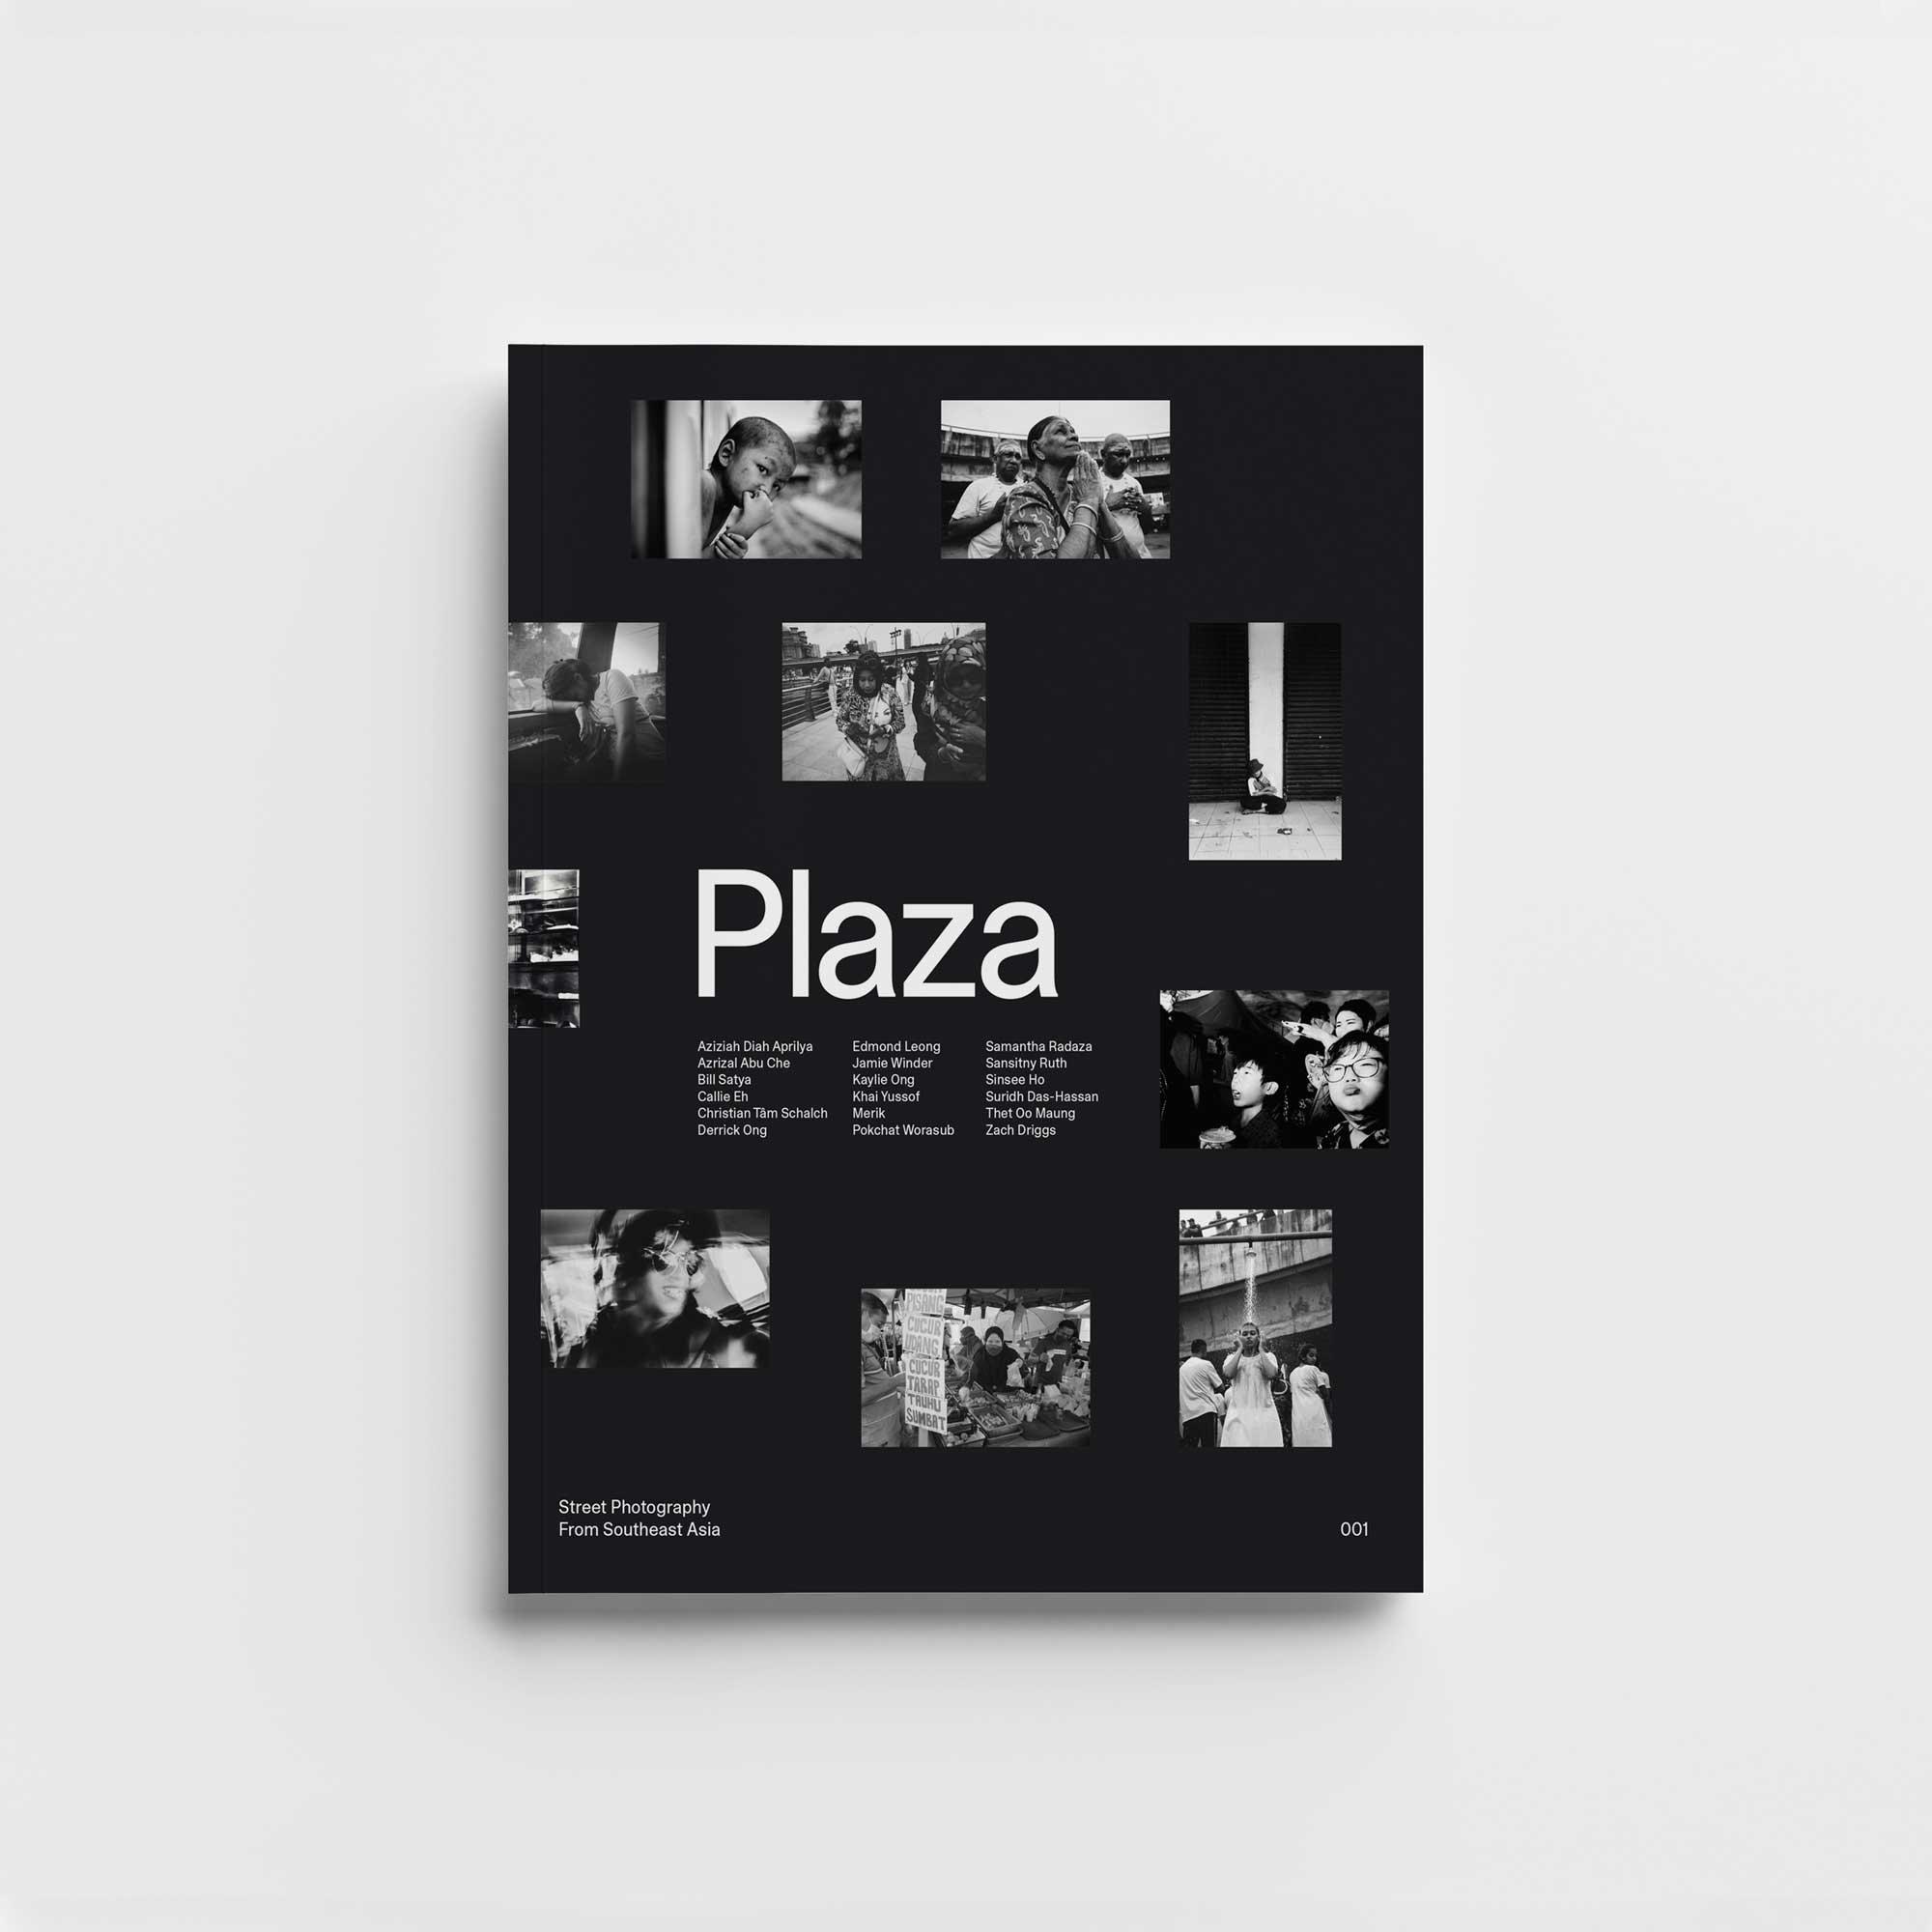 Plaza<br>Street Photography From Southeast Asia